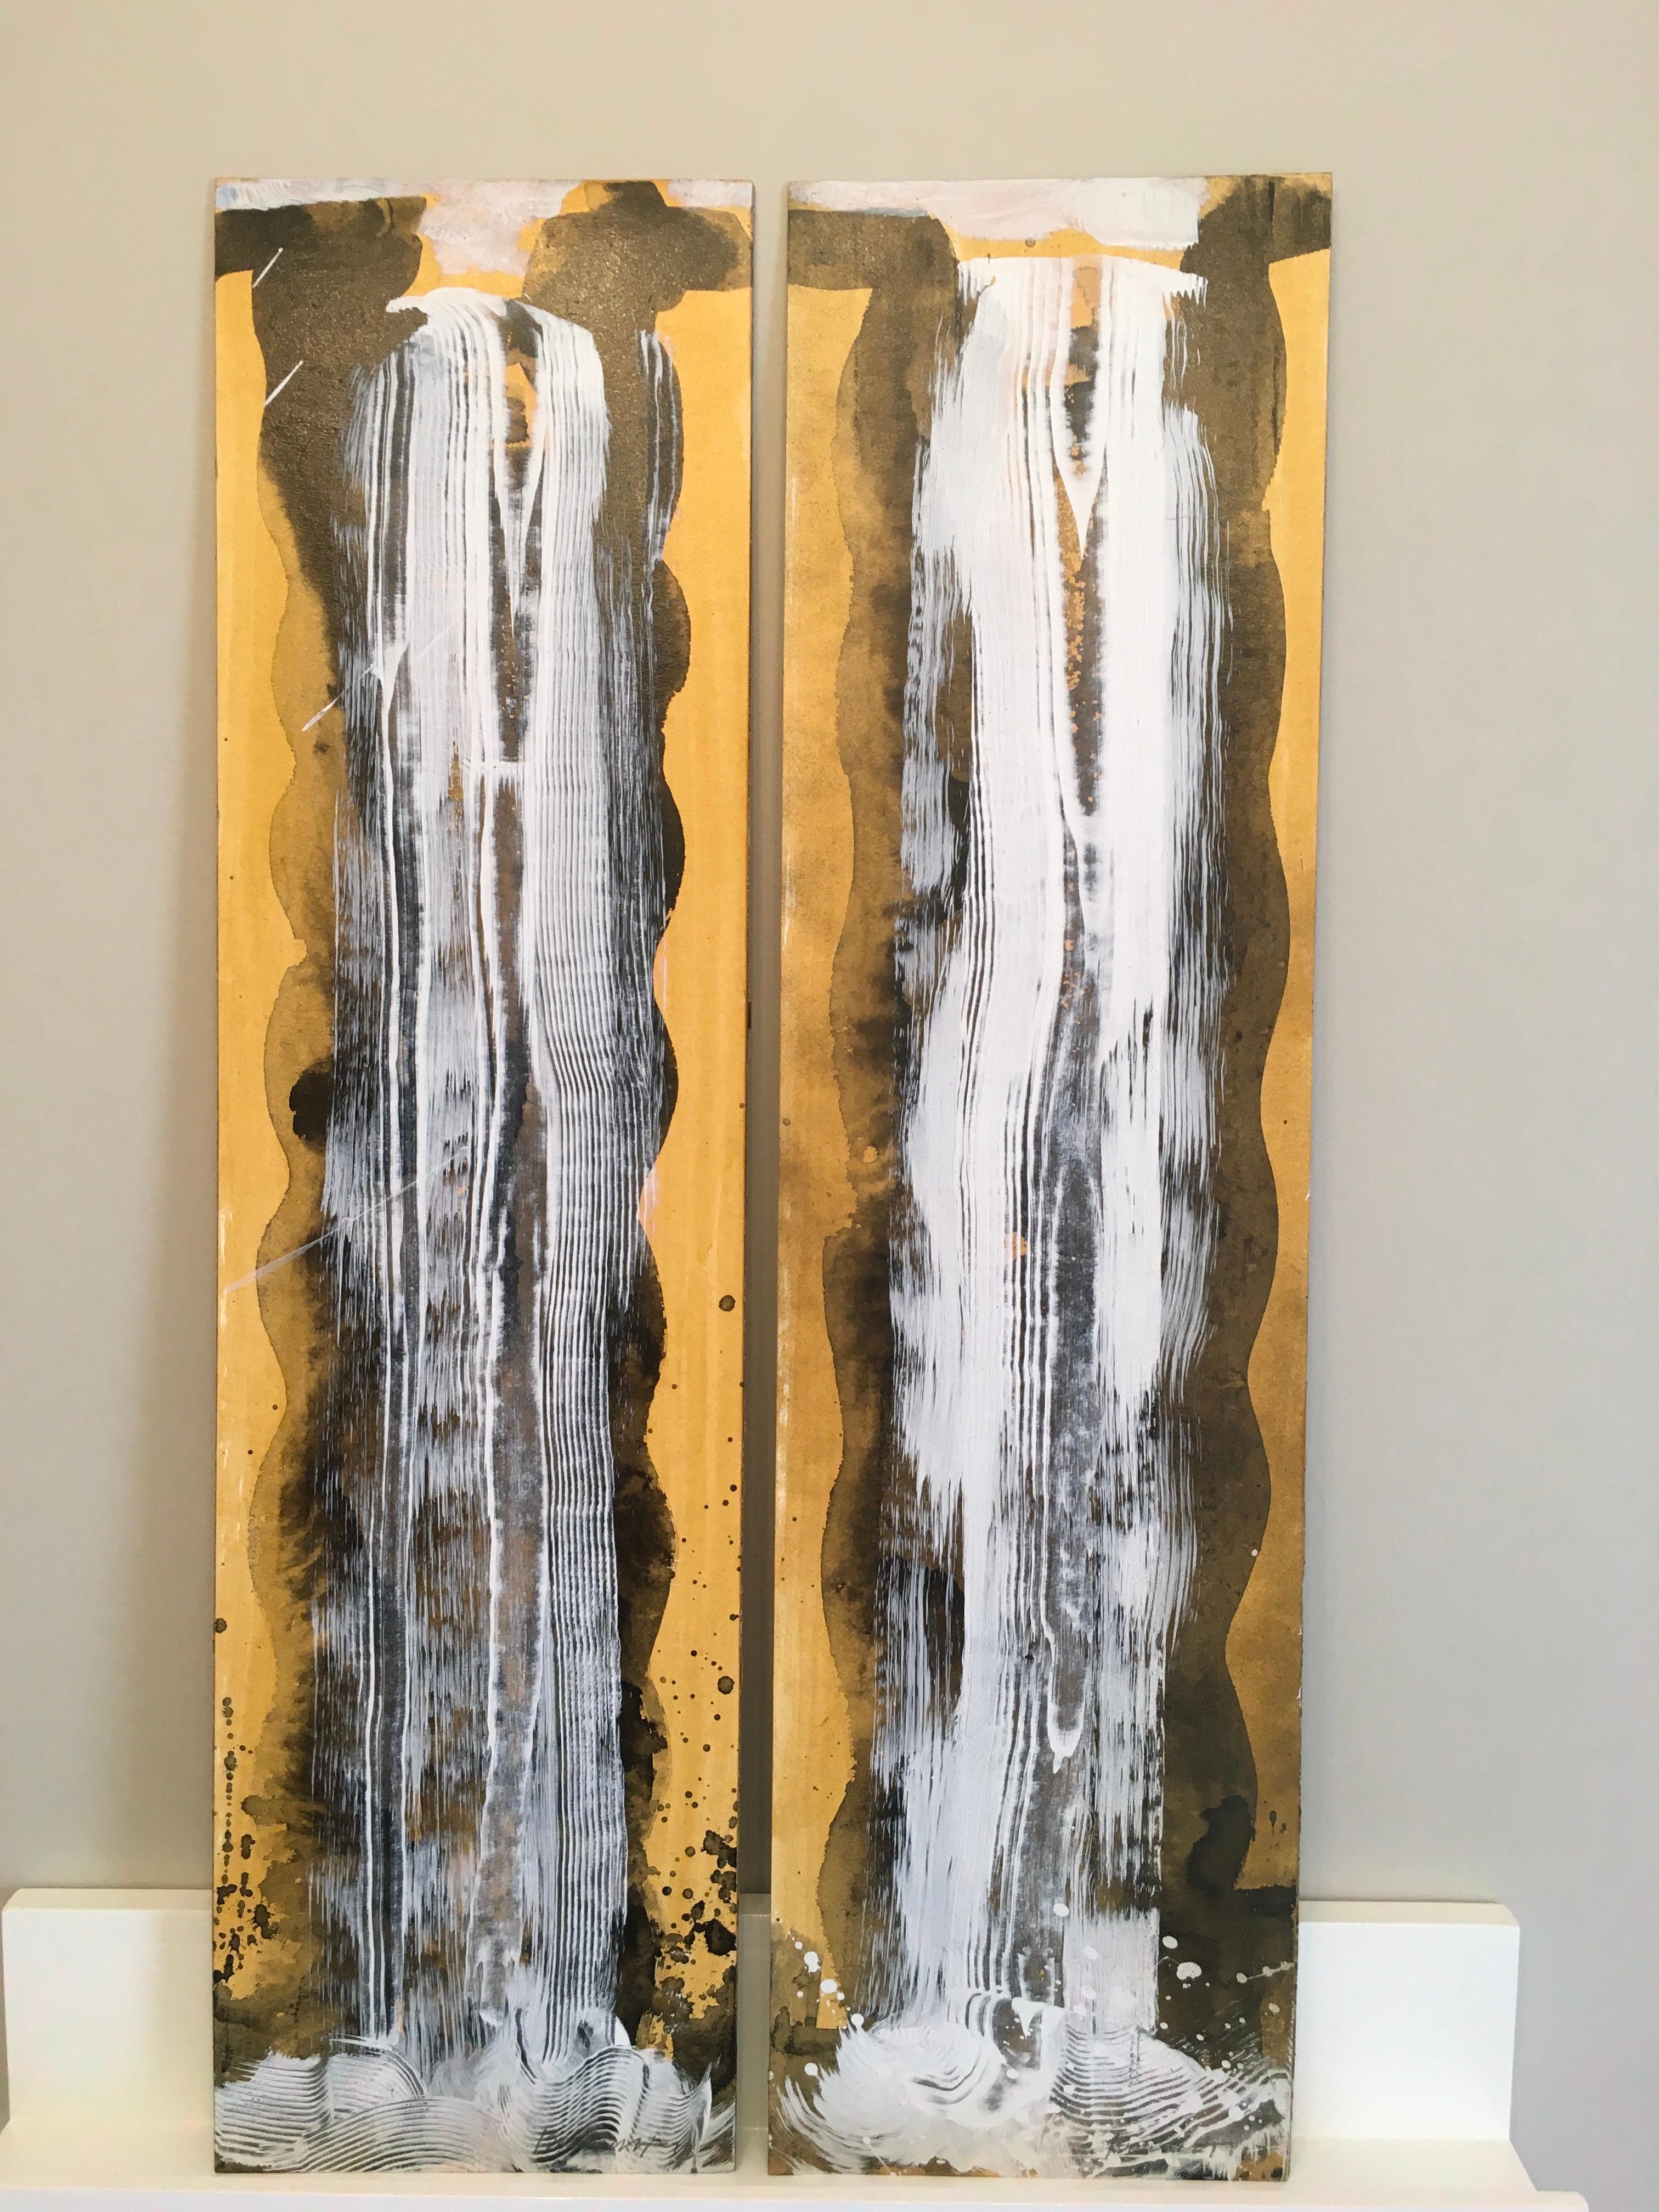 Waterfall Duet 2, Water, Gold, White, Flowing, Acrylic, Oil, Painting, unframed - Black Landscape Painting by Carol Bennett